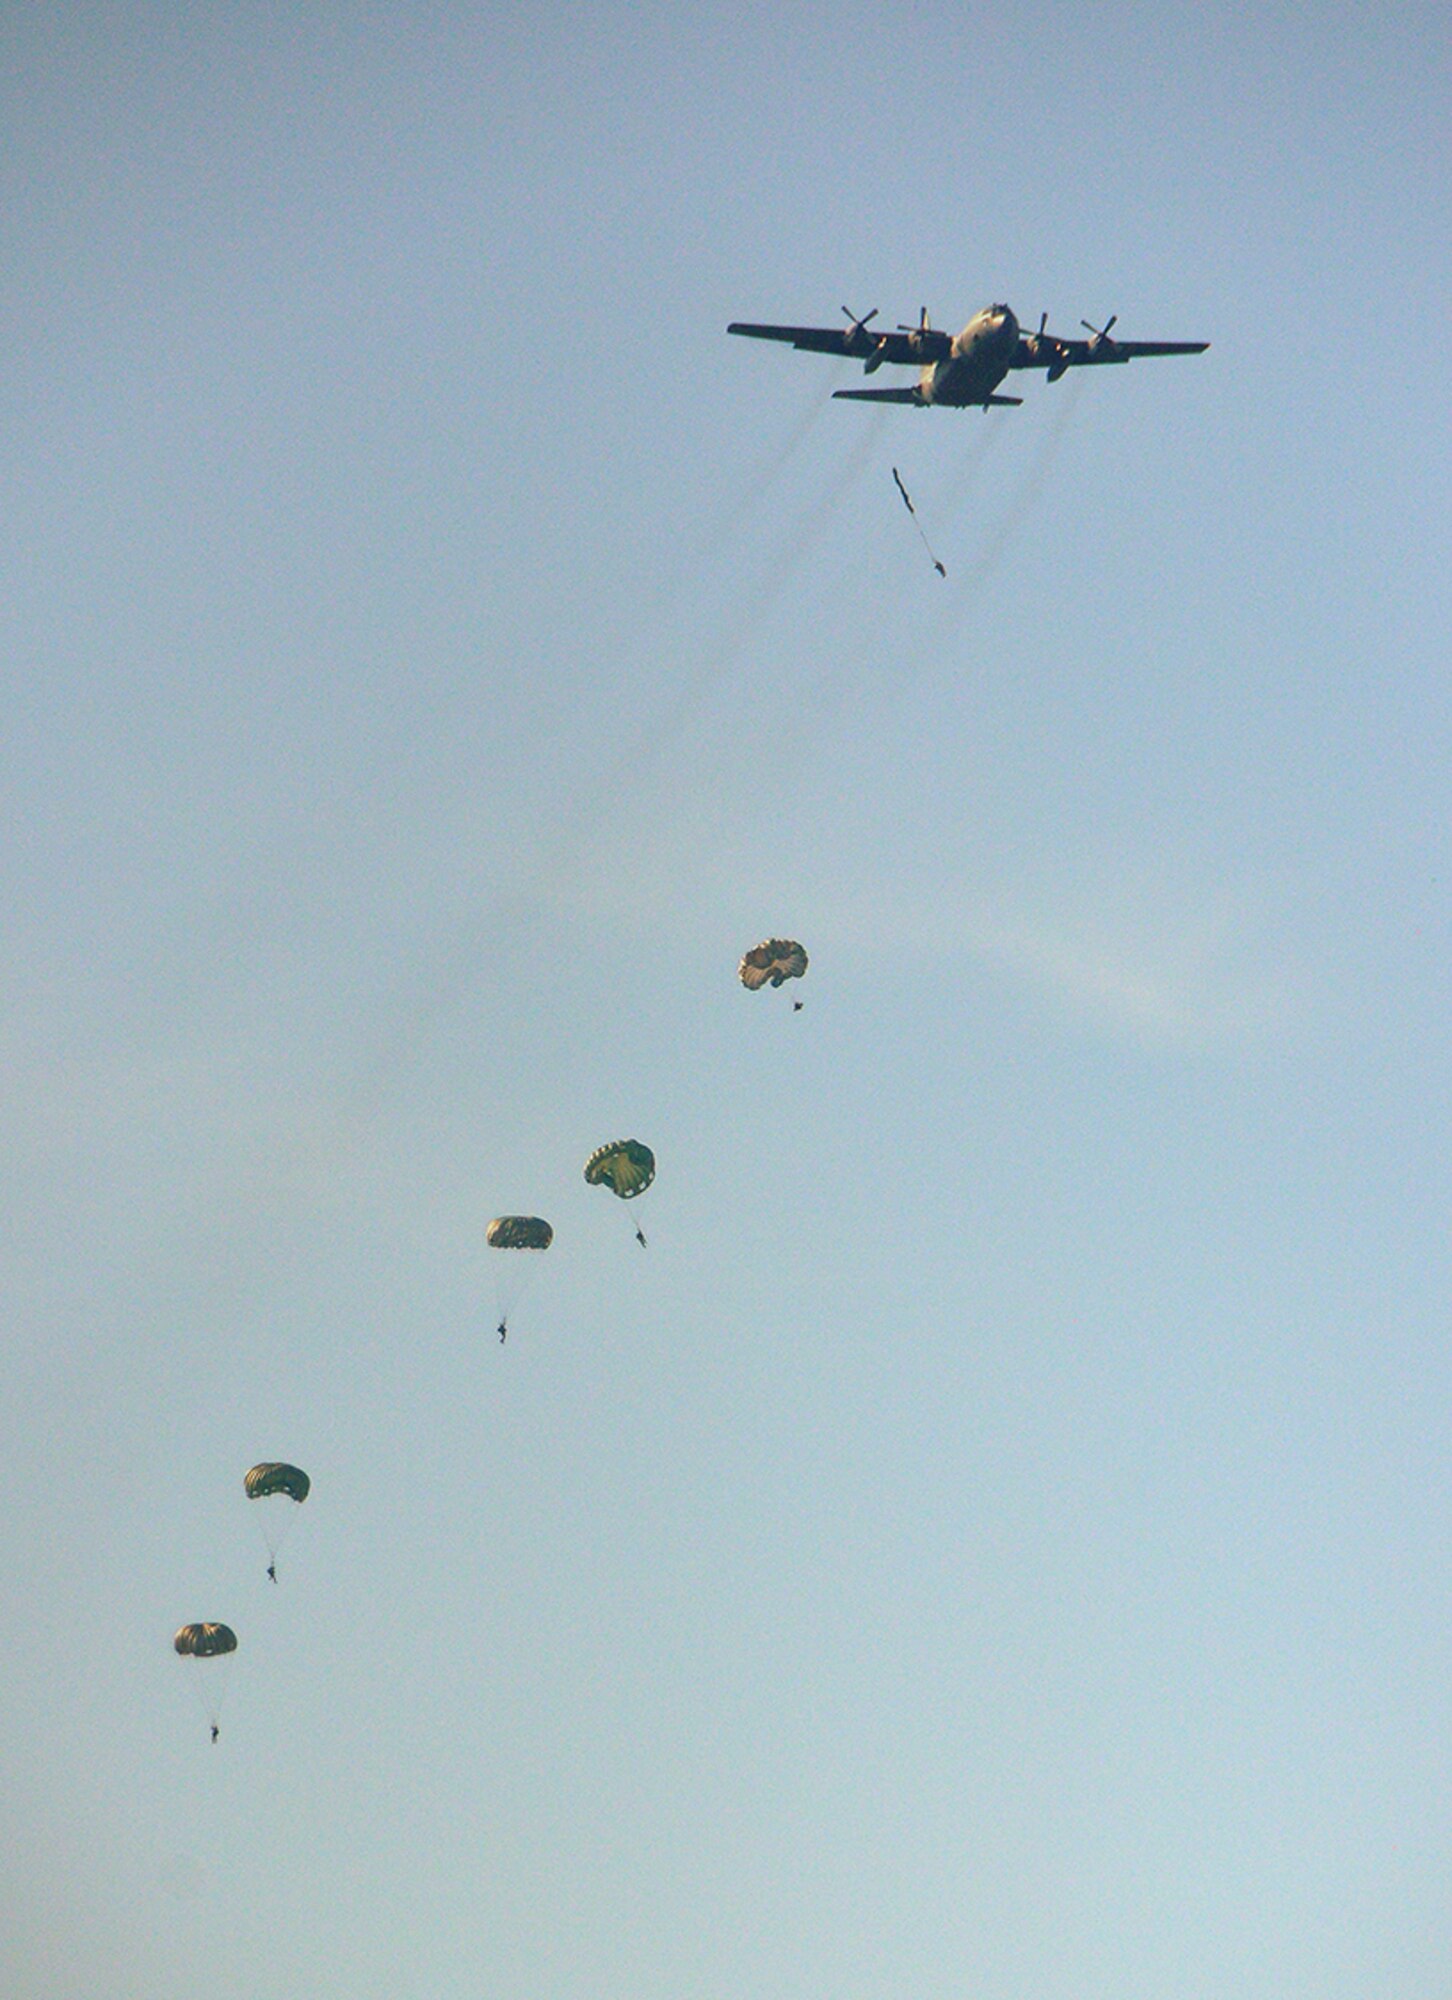 Paratroopers jump from the 908th's C-130. (Photo by Gene H. Hughes)